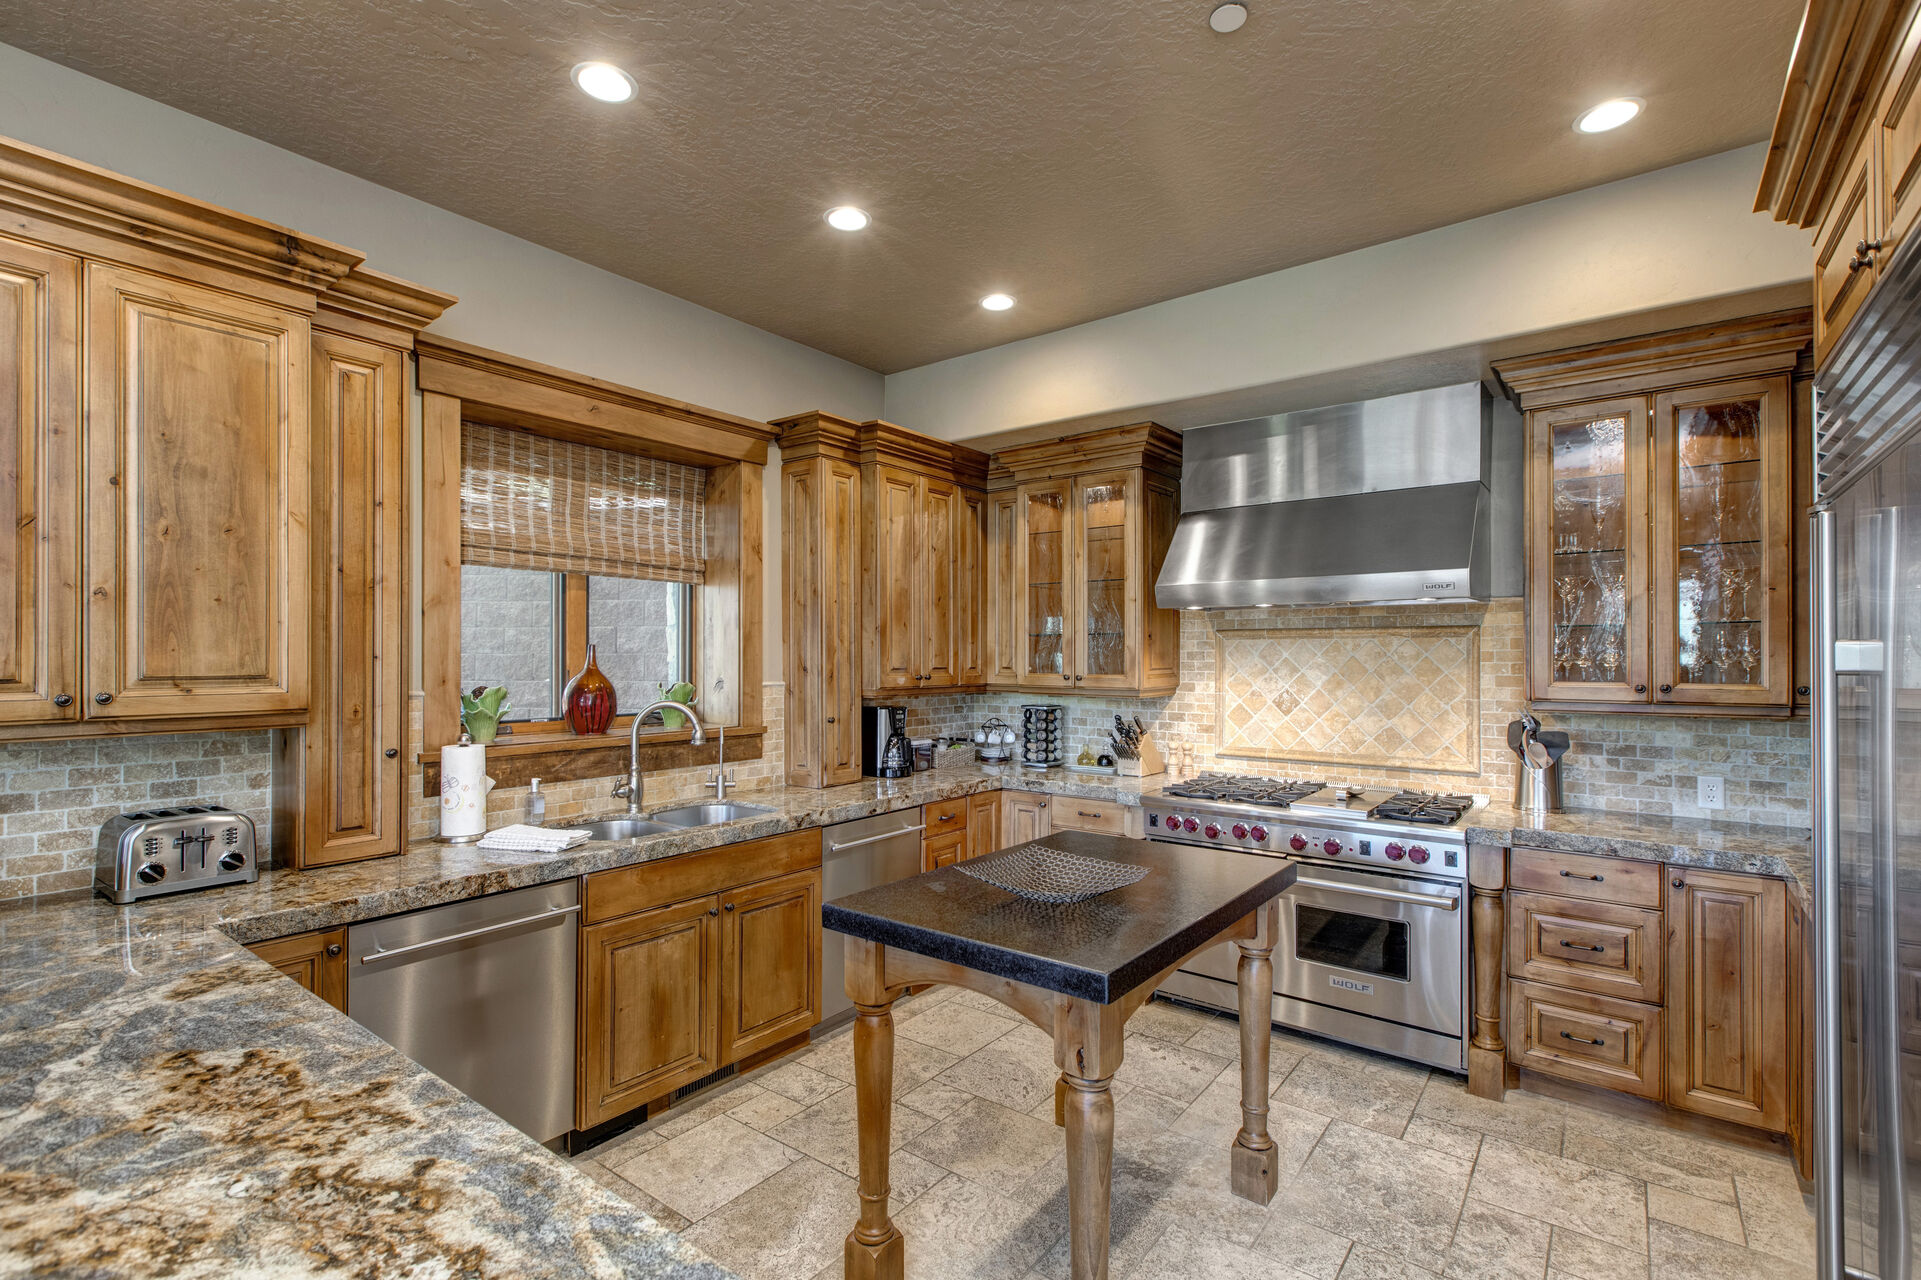 Kitchen with granite island, stone countertops, stainless steel appliances, Wolff stove, walk-in pantry, and bar seating for three